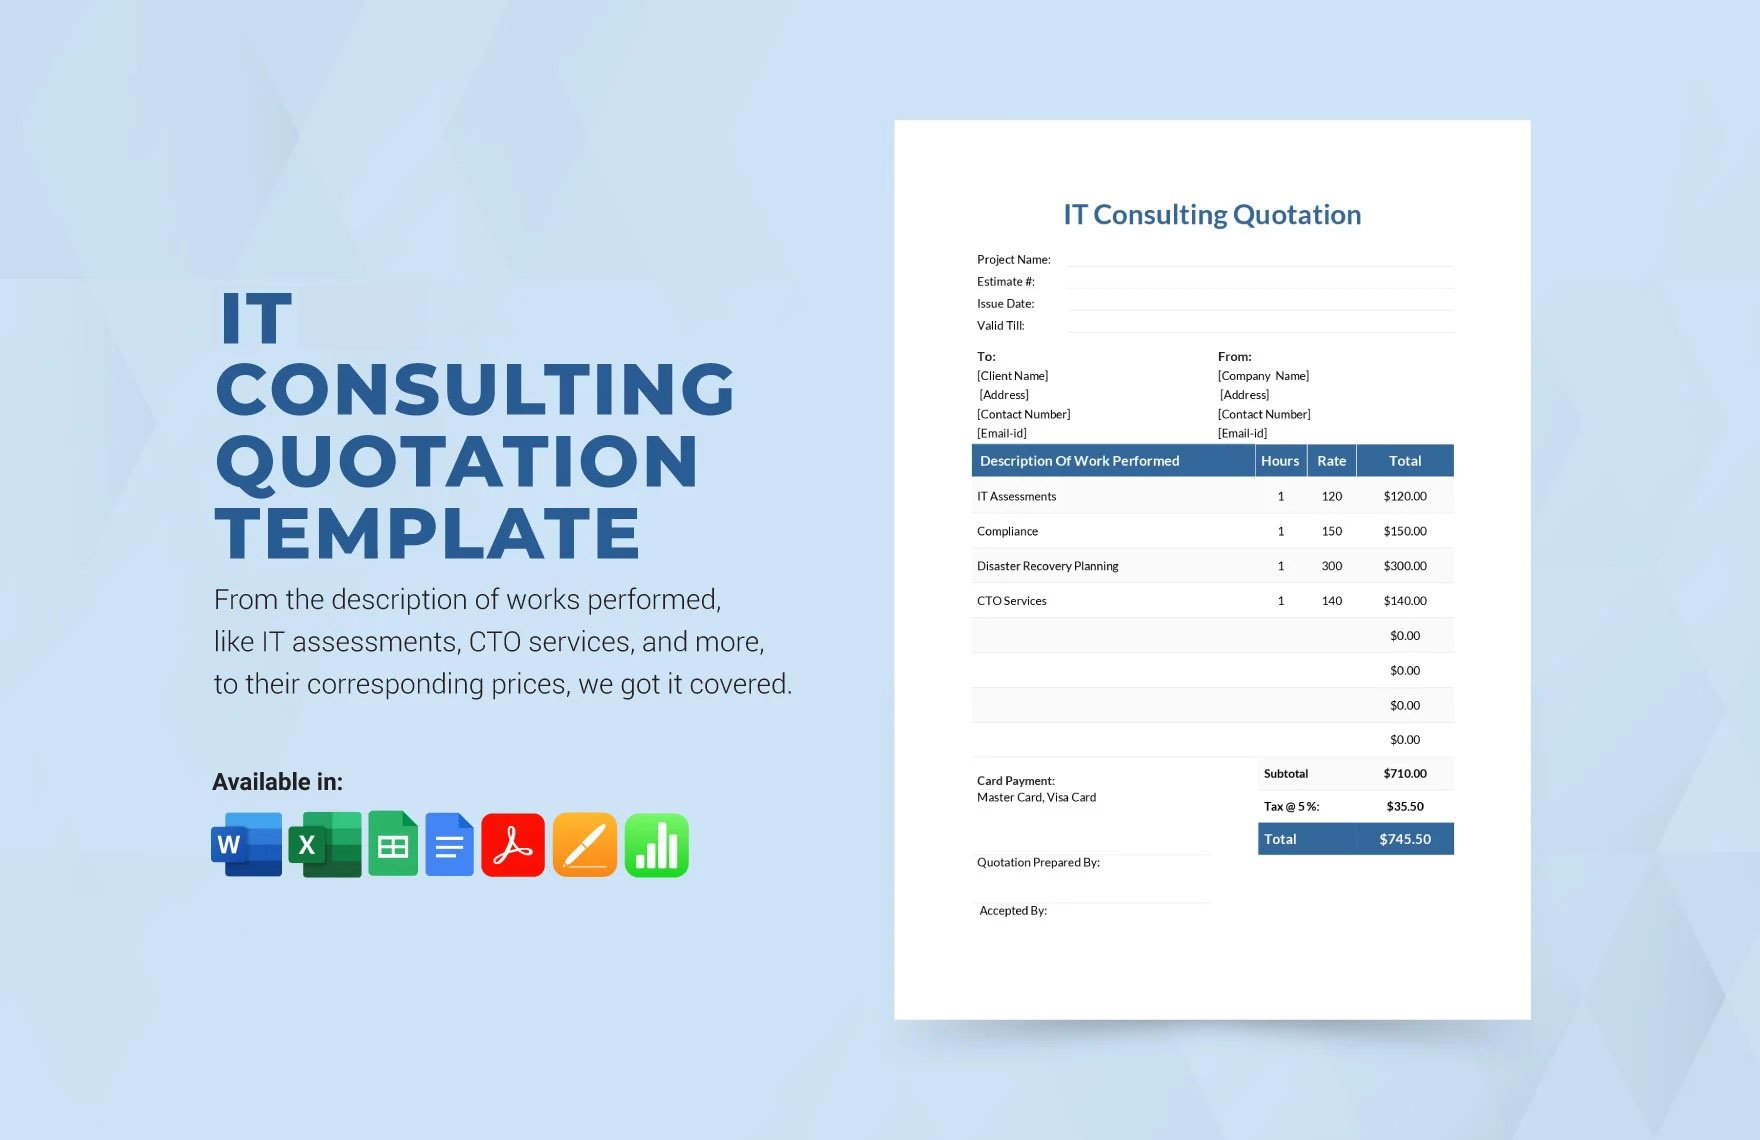 IT Consulting Quotation Template